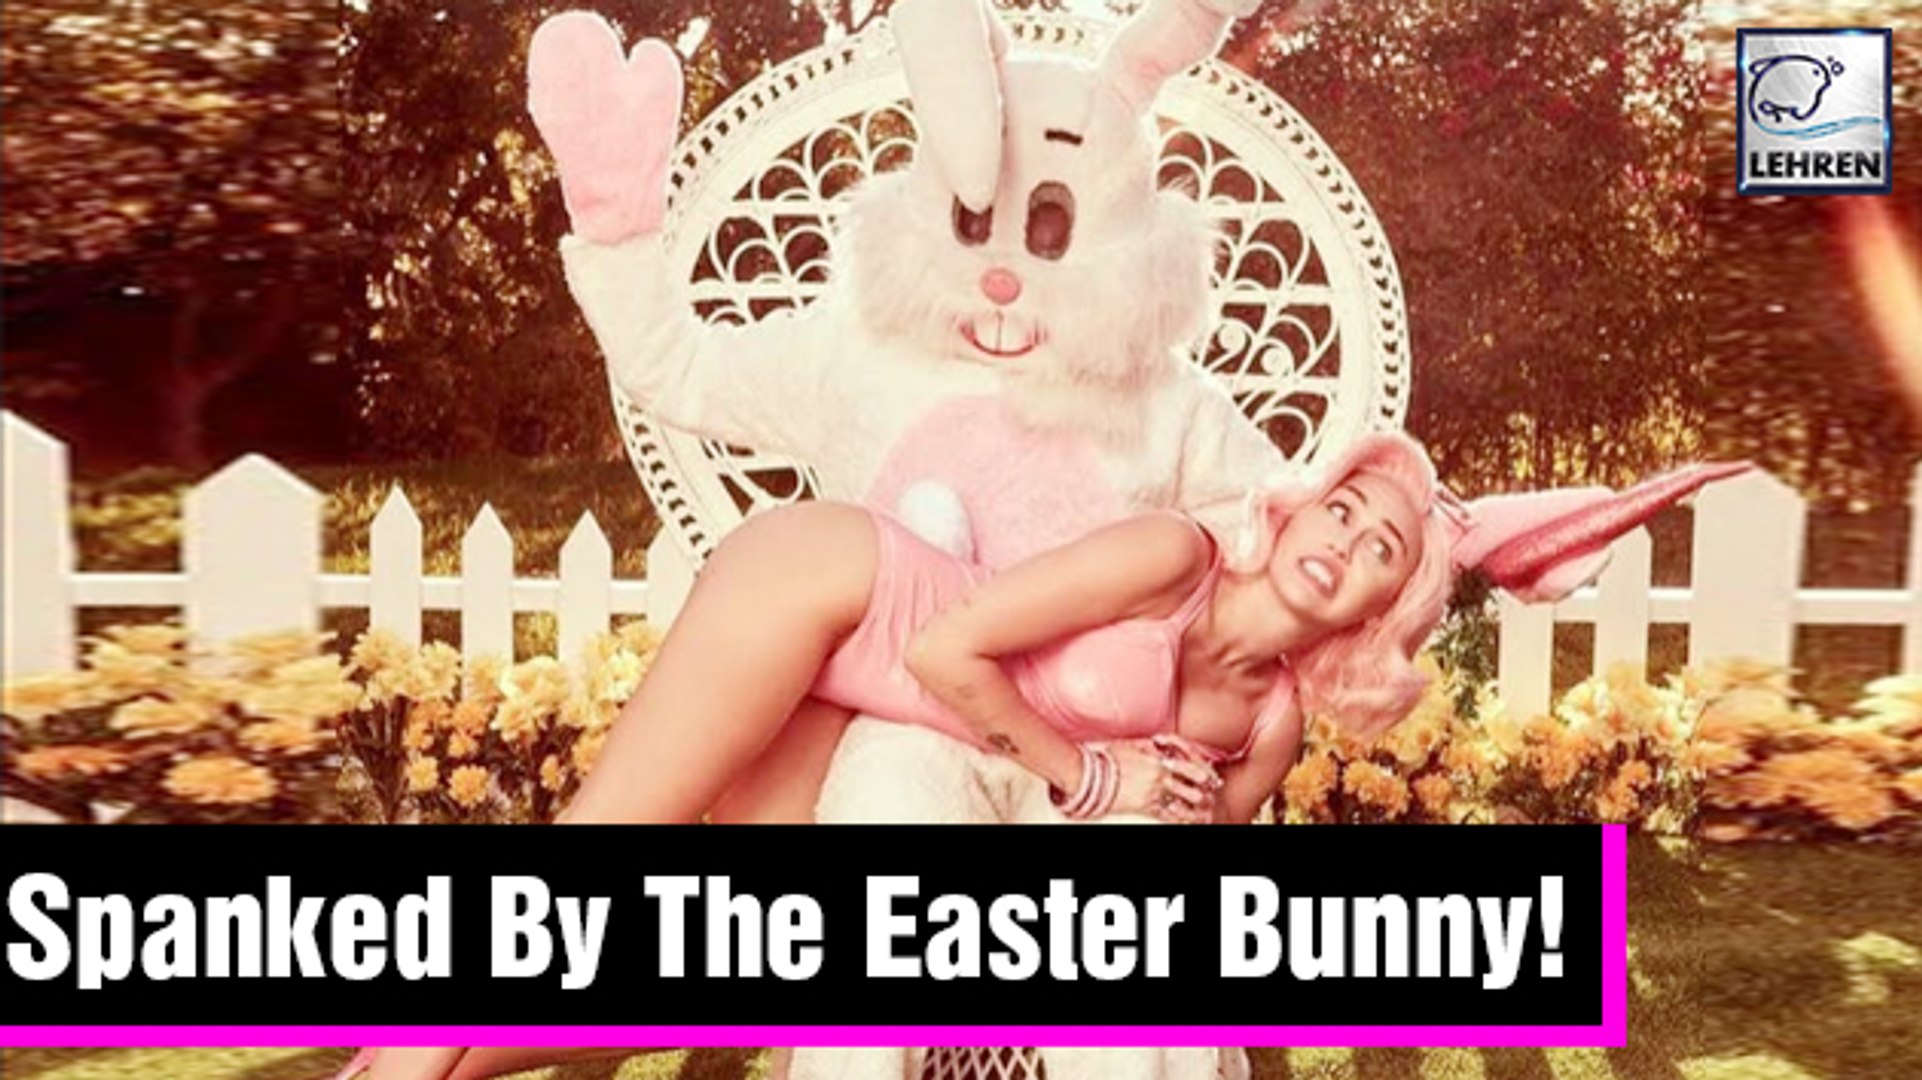 Miley Cyrus Spanked By Naughty Bunny In Racy Easter Photo Shoot